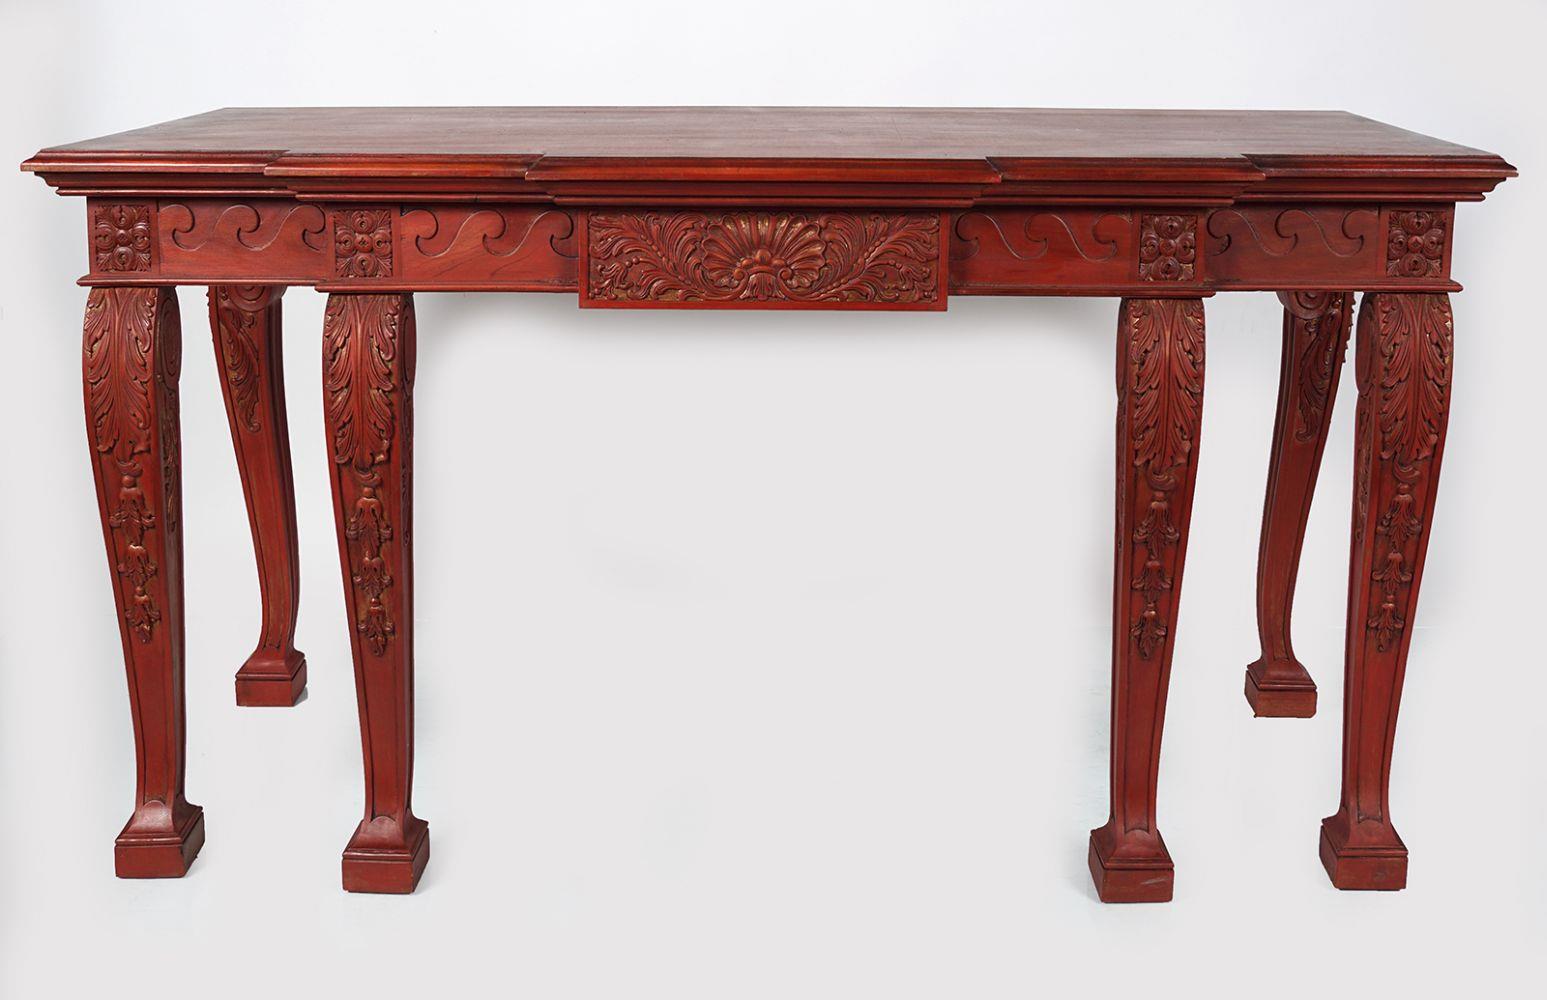 LARGE WILLIAM KENT STYLE CONSOLE TABLE